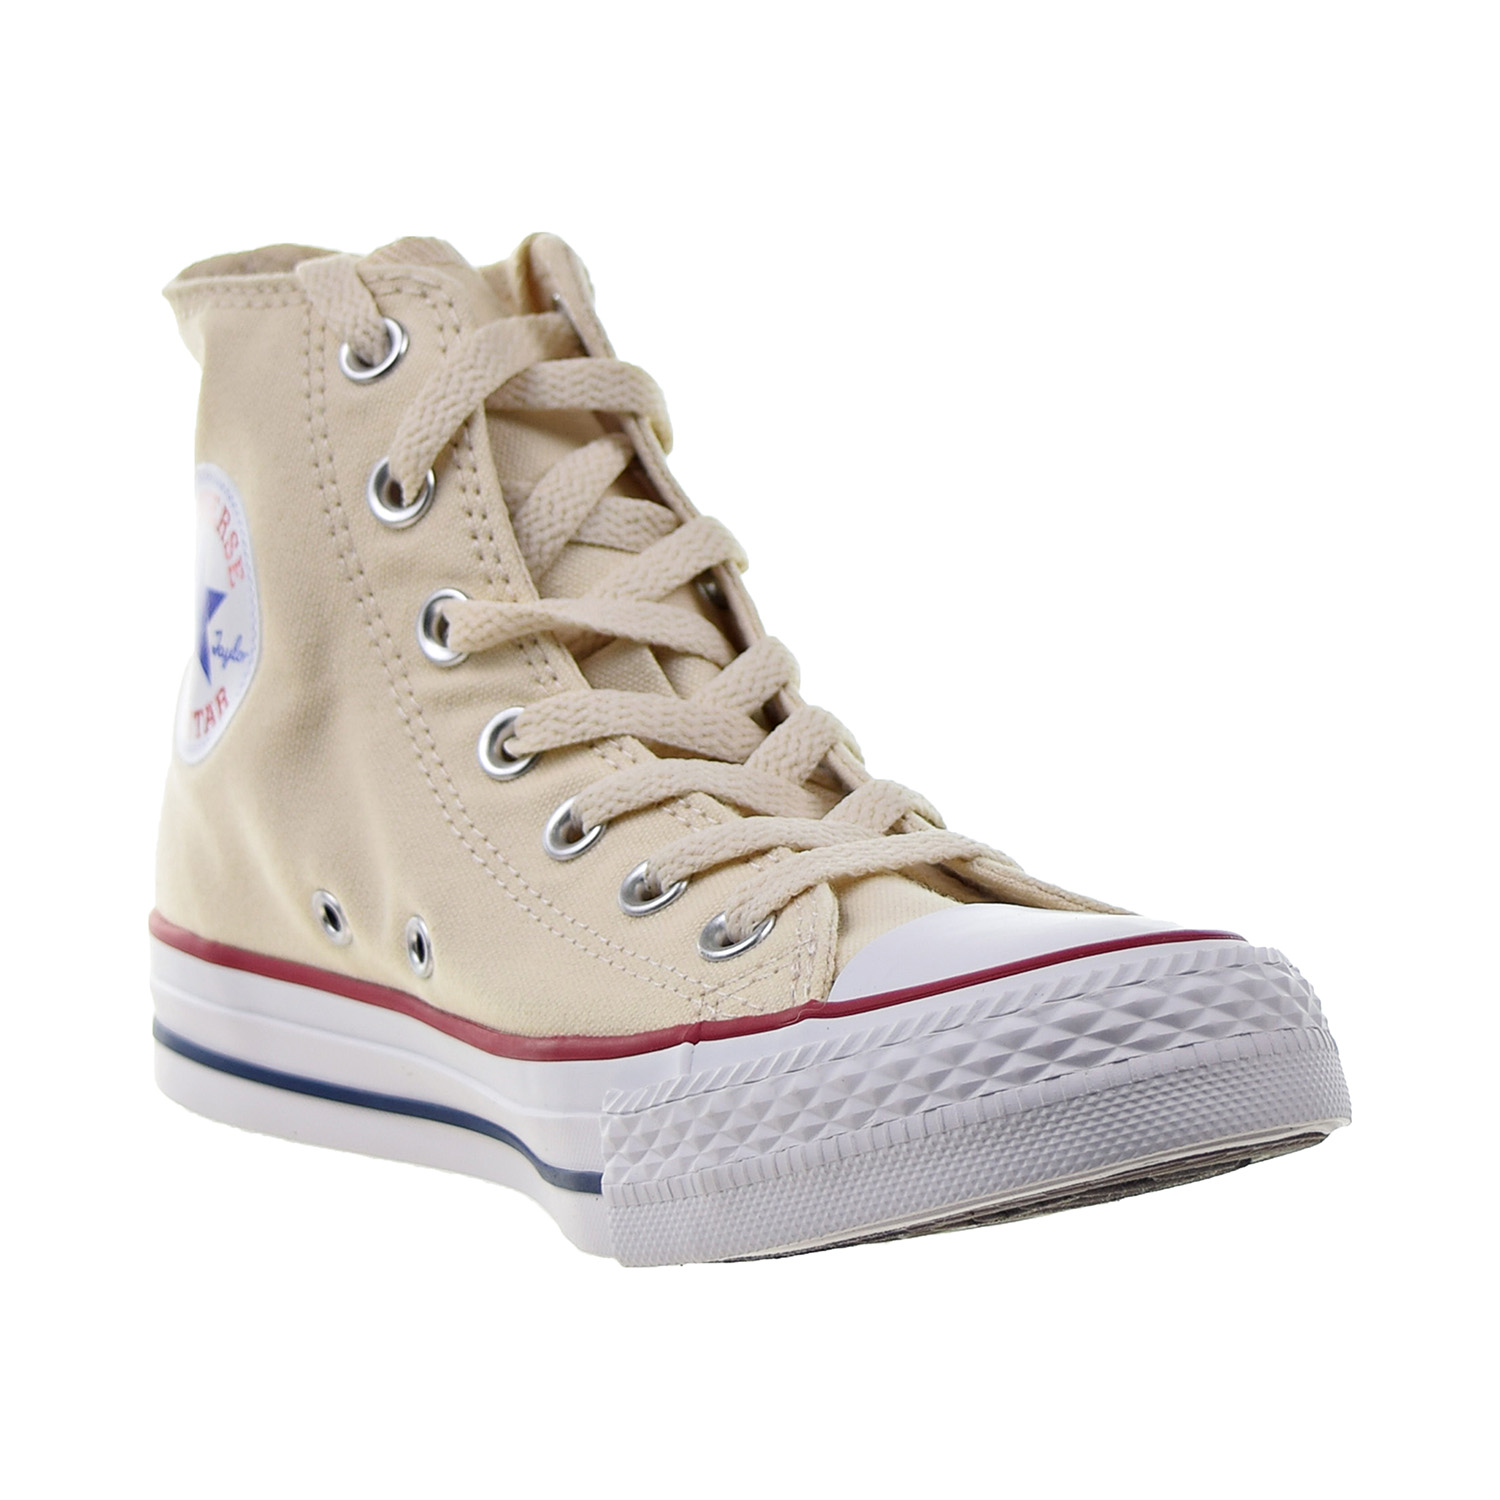 Converse Chuck Taylor All Star High Top Sneaker - image 2 of 6